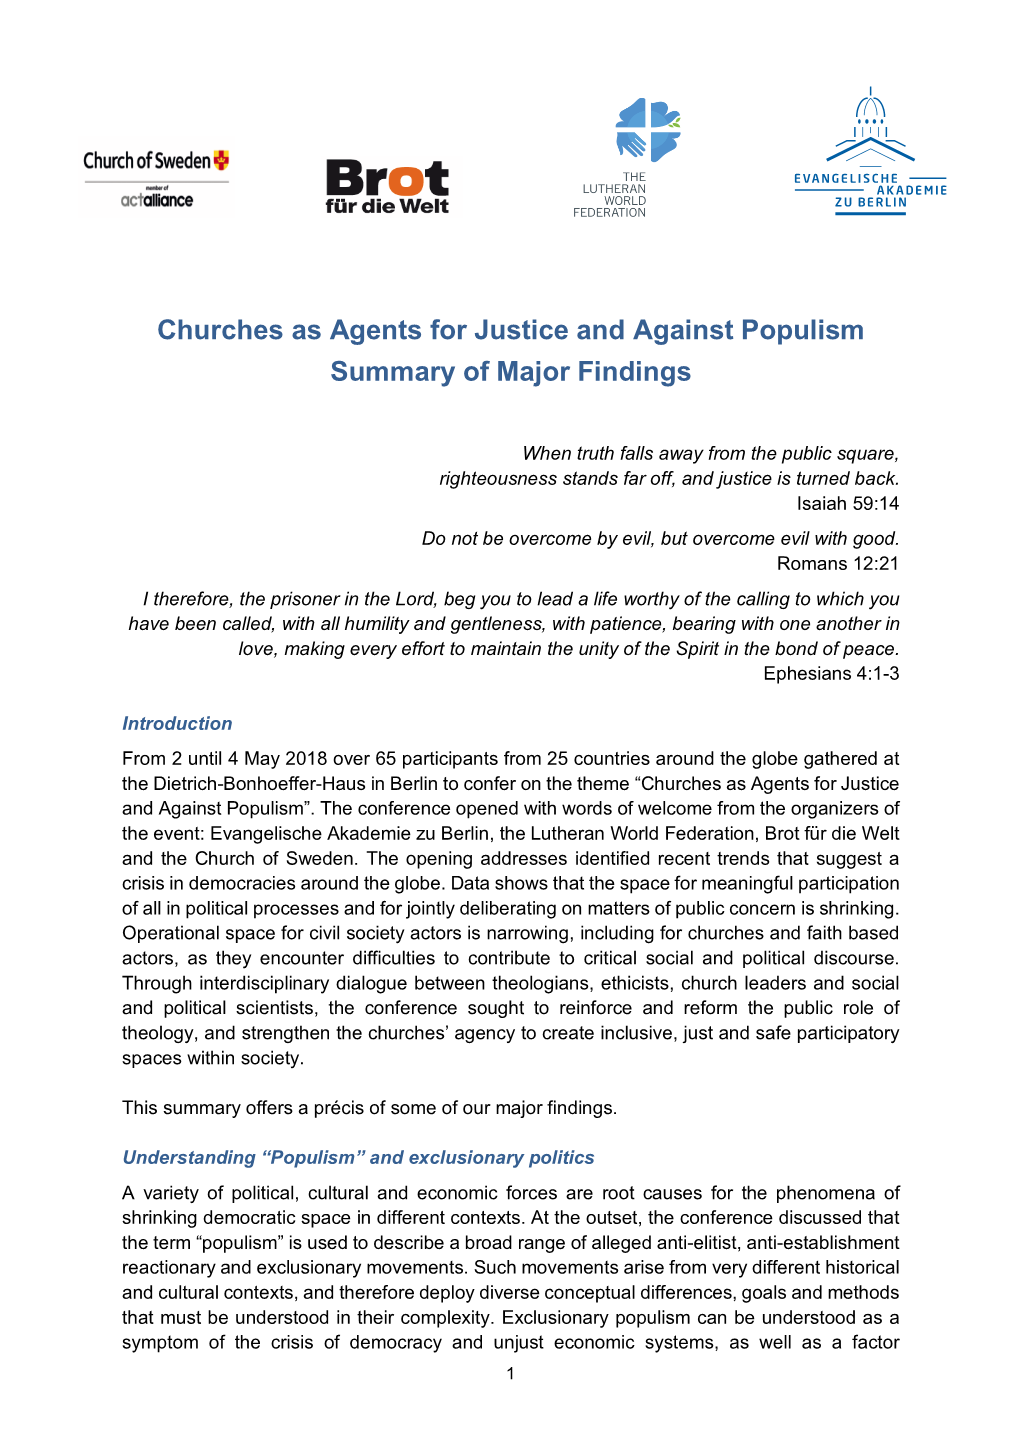 Churches As Agents for Justice Conference May 2018 Final